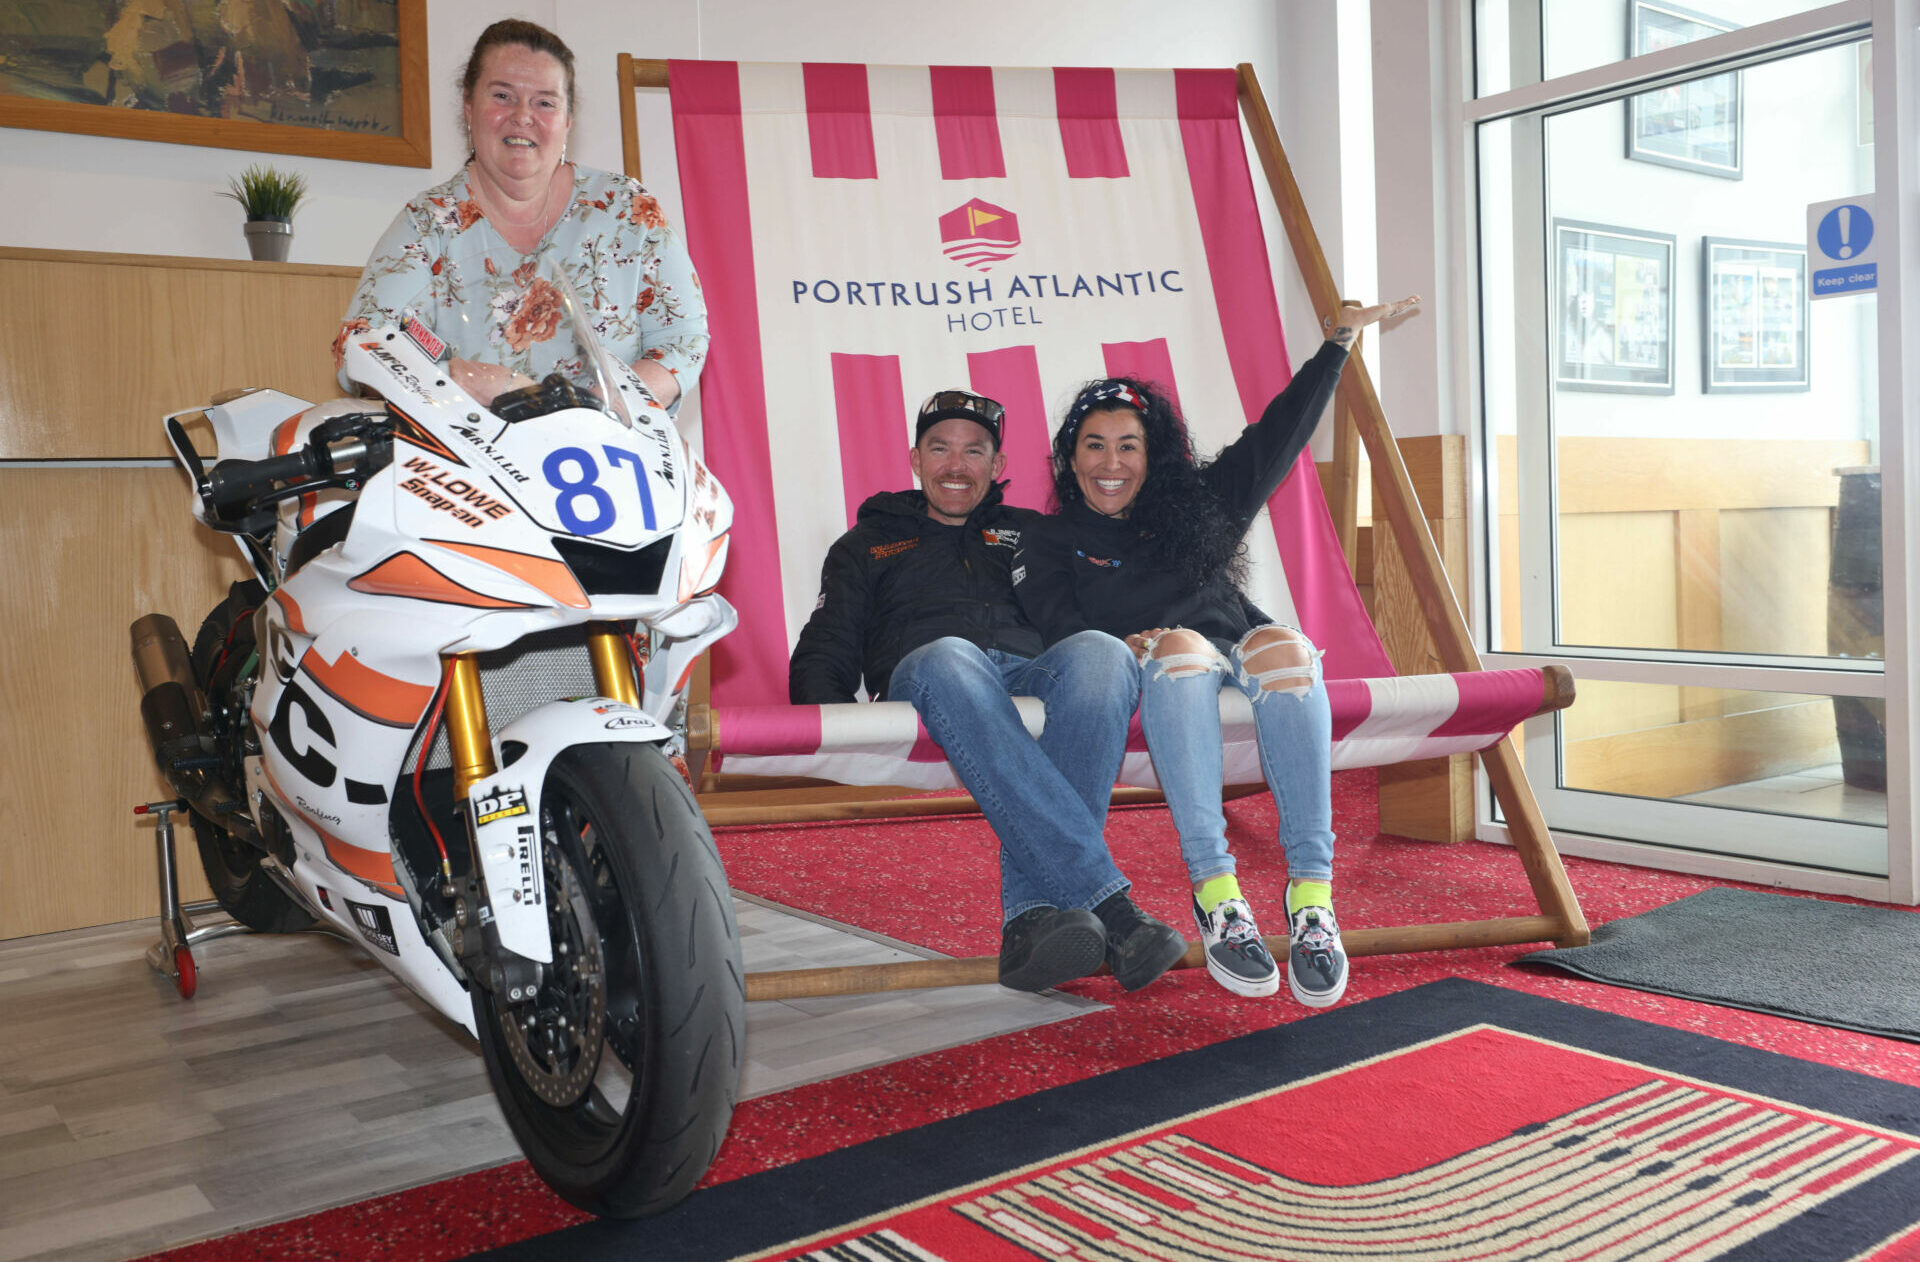 Cory West and Patricia Fernandez-West (seated) with Natasha Garrott (standing), the General Manager of the Atlantic Hotel in Portrush. Photo courtesy NW200 Press Office.